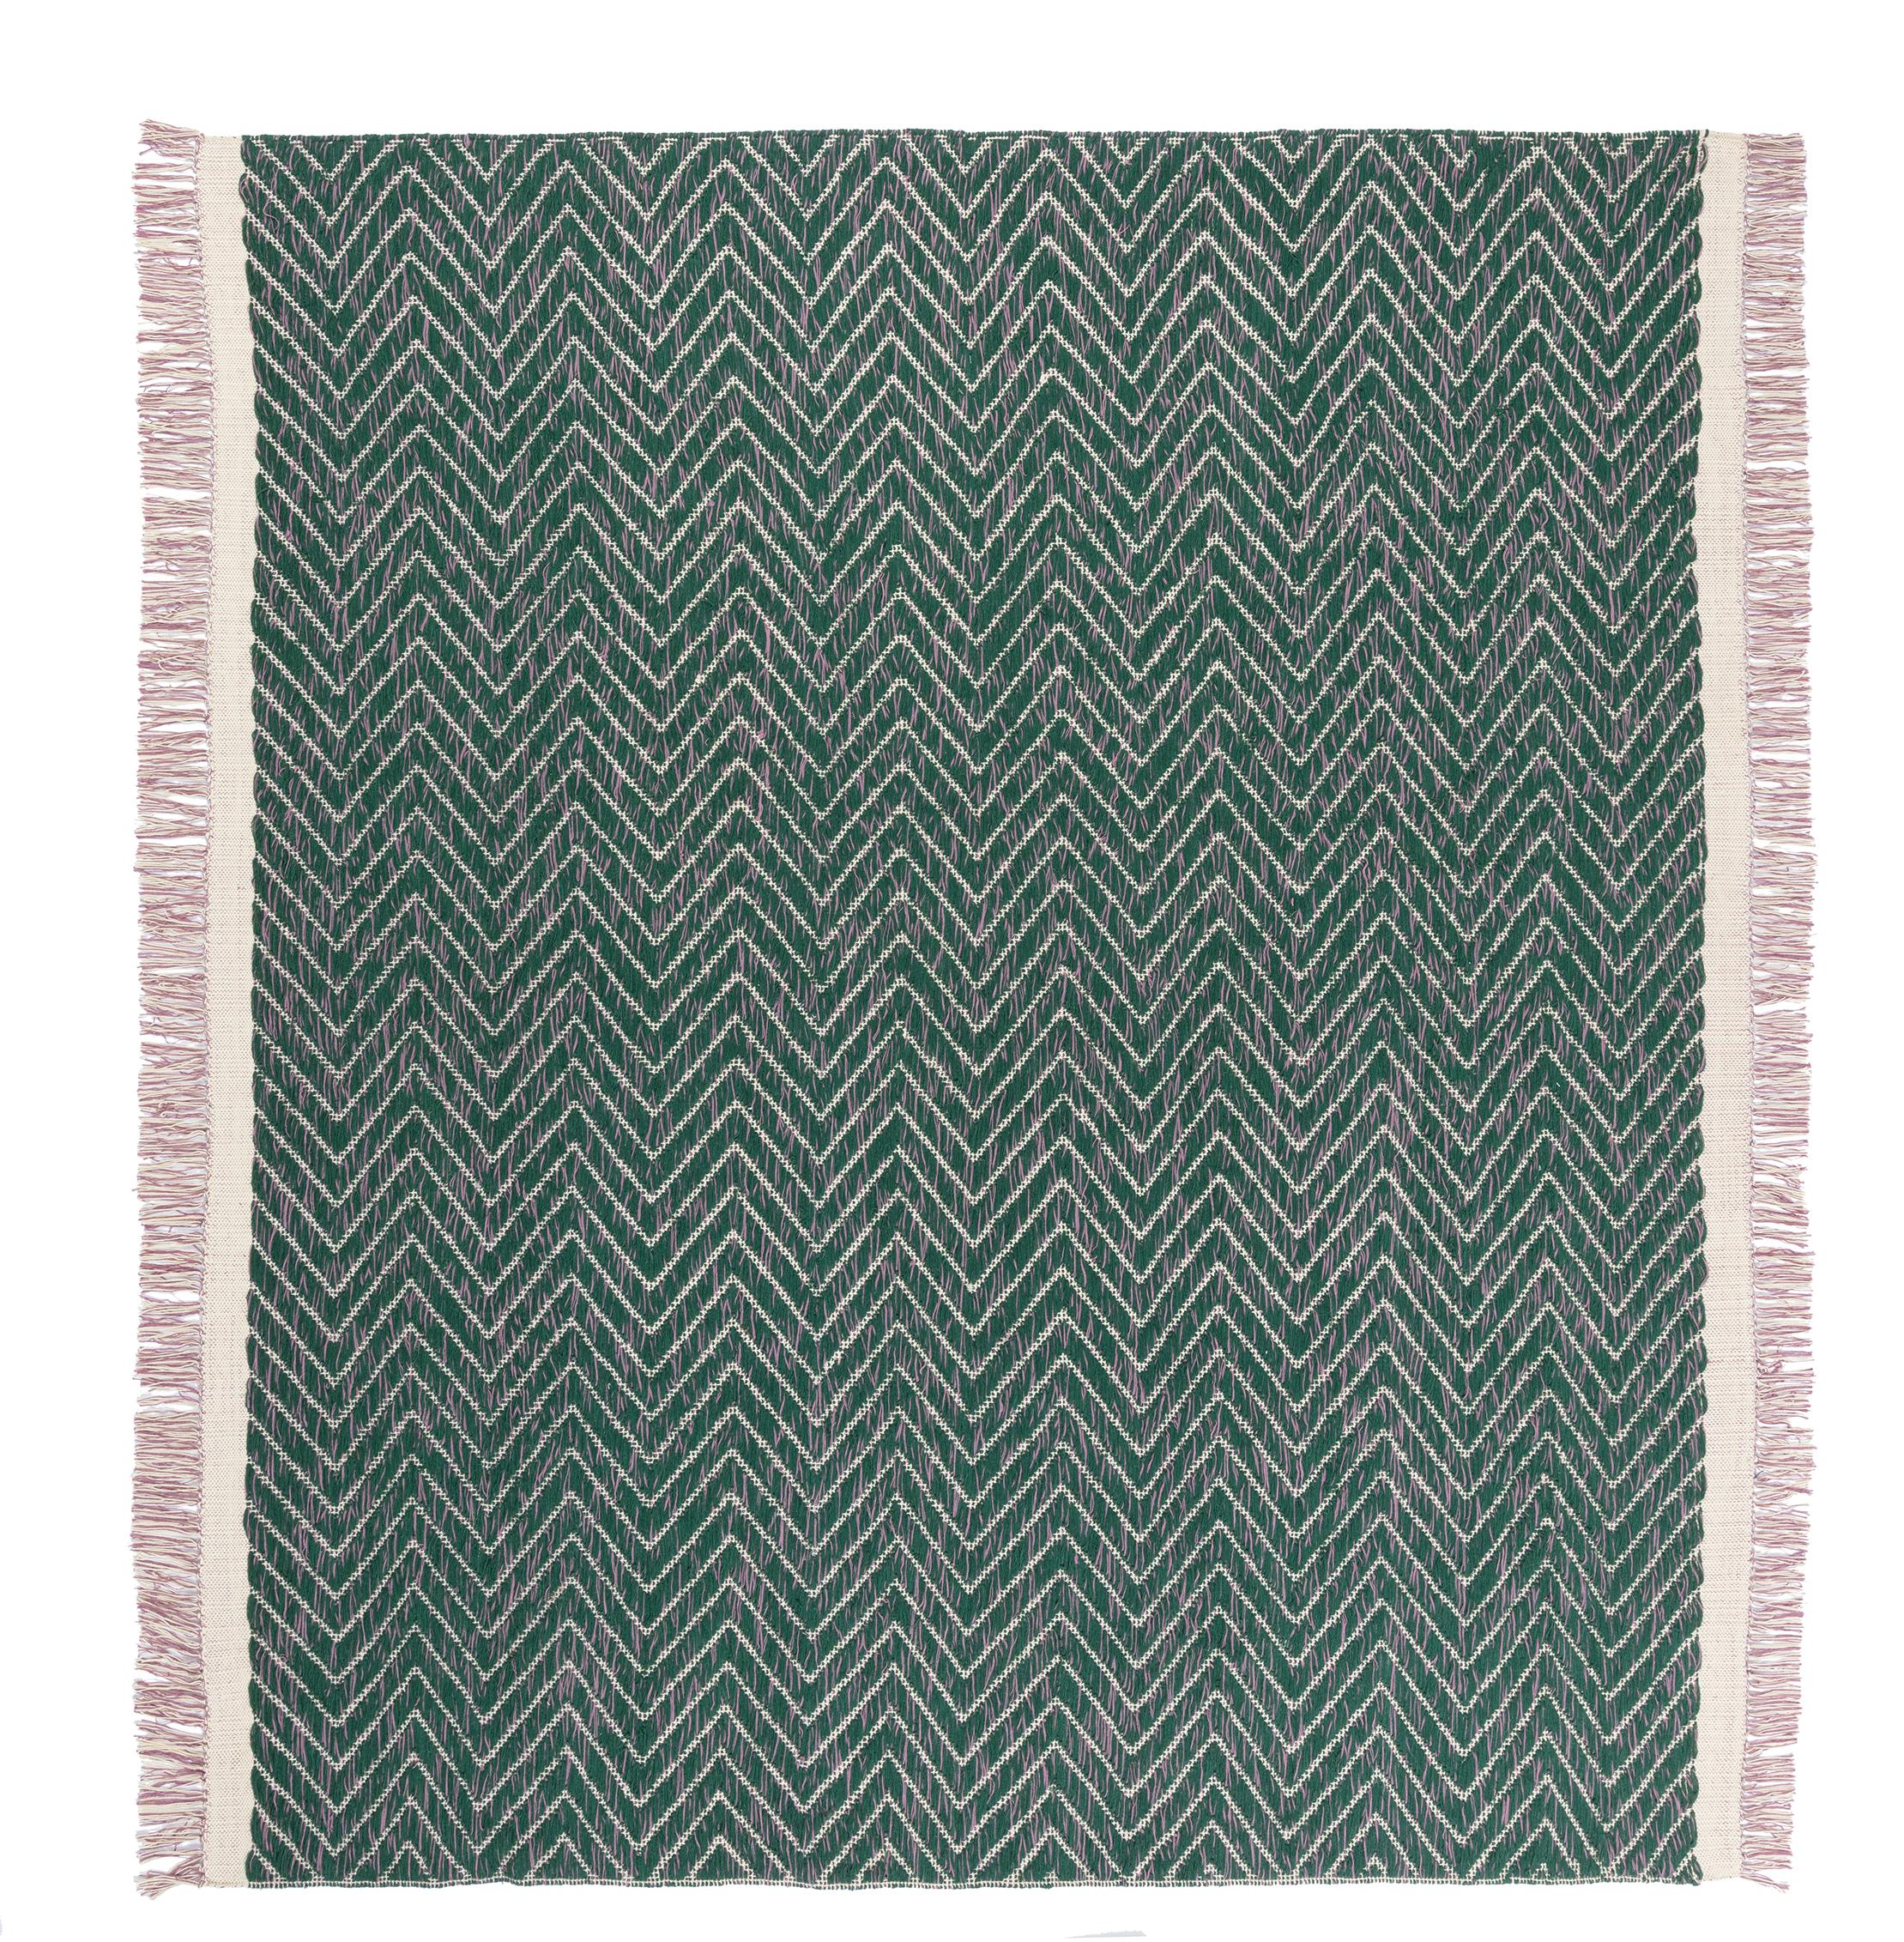 Cultivate collection by Yuri Himuro This rug’s idea is from my SNIP SNAP collections. SNIP SNAP is a jacquard weaving textile that allows you to snip and snap with scissors to arrange its design. I develop my own weaving mechanism that leads me to